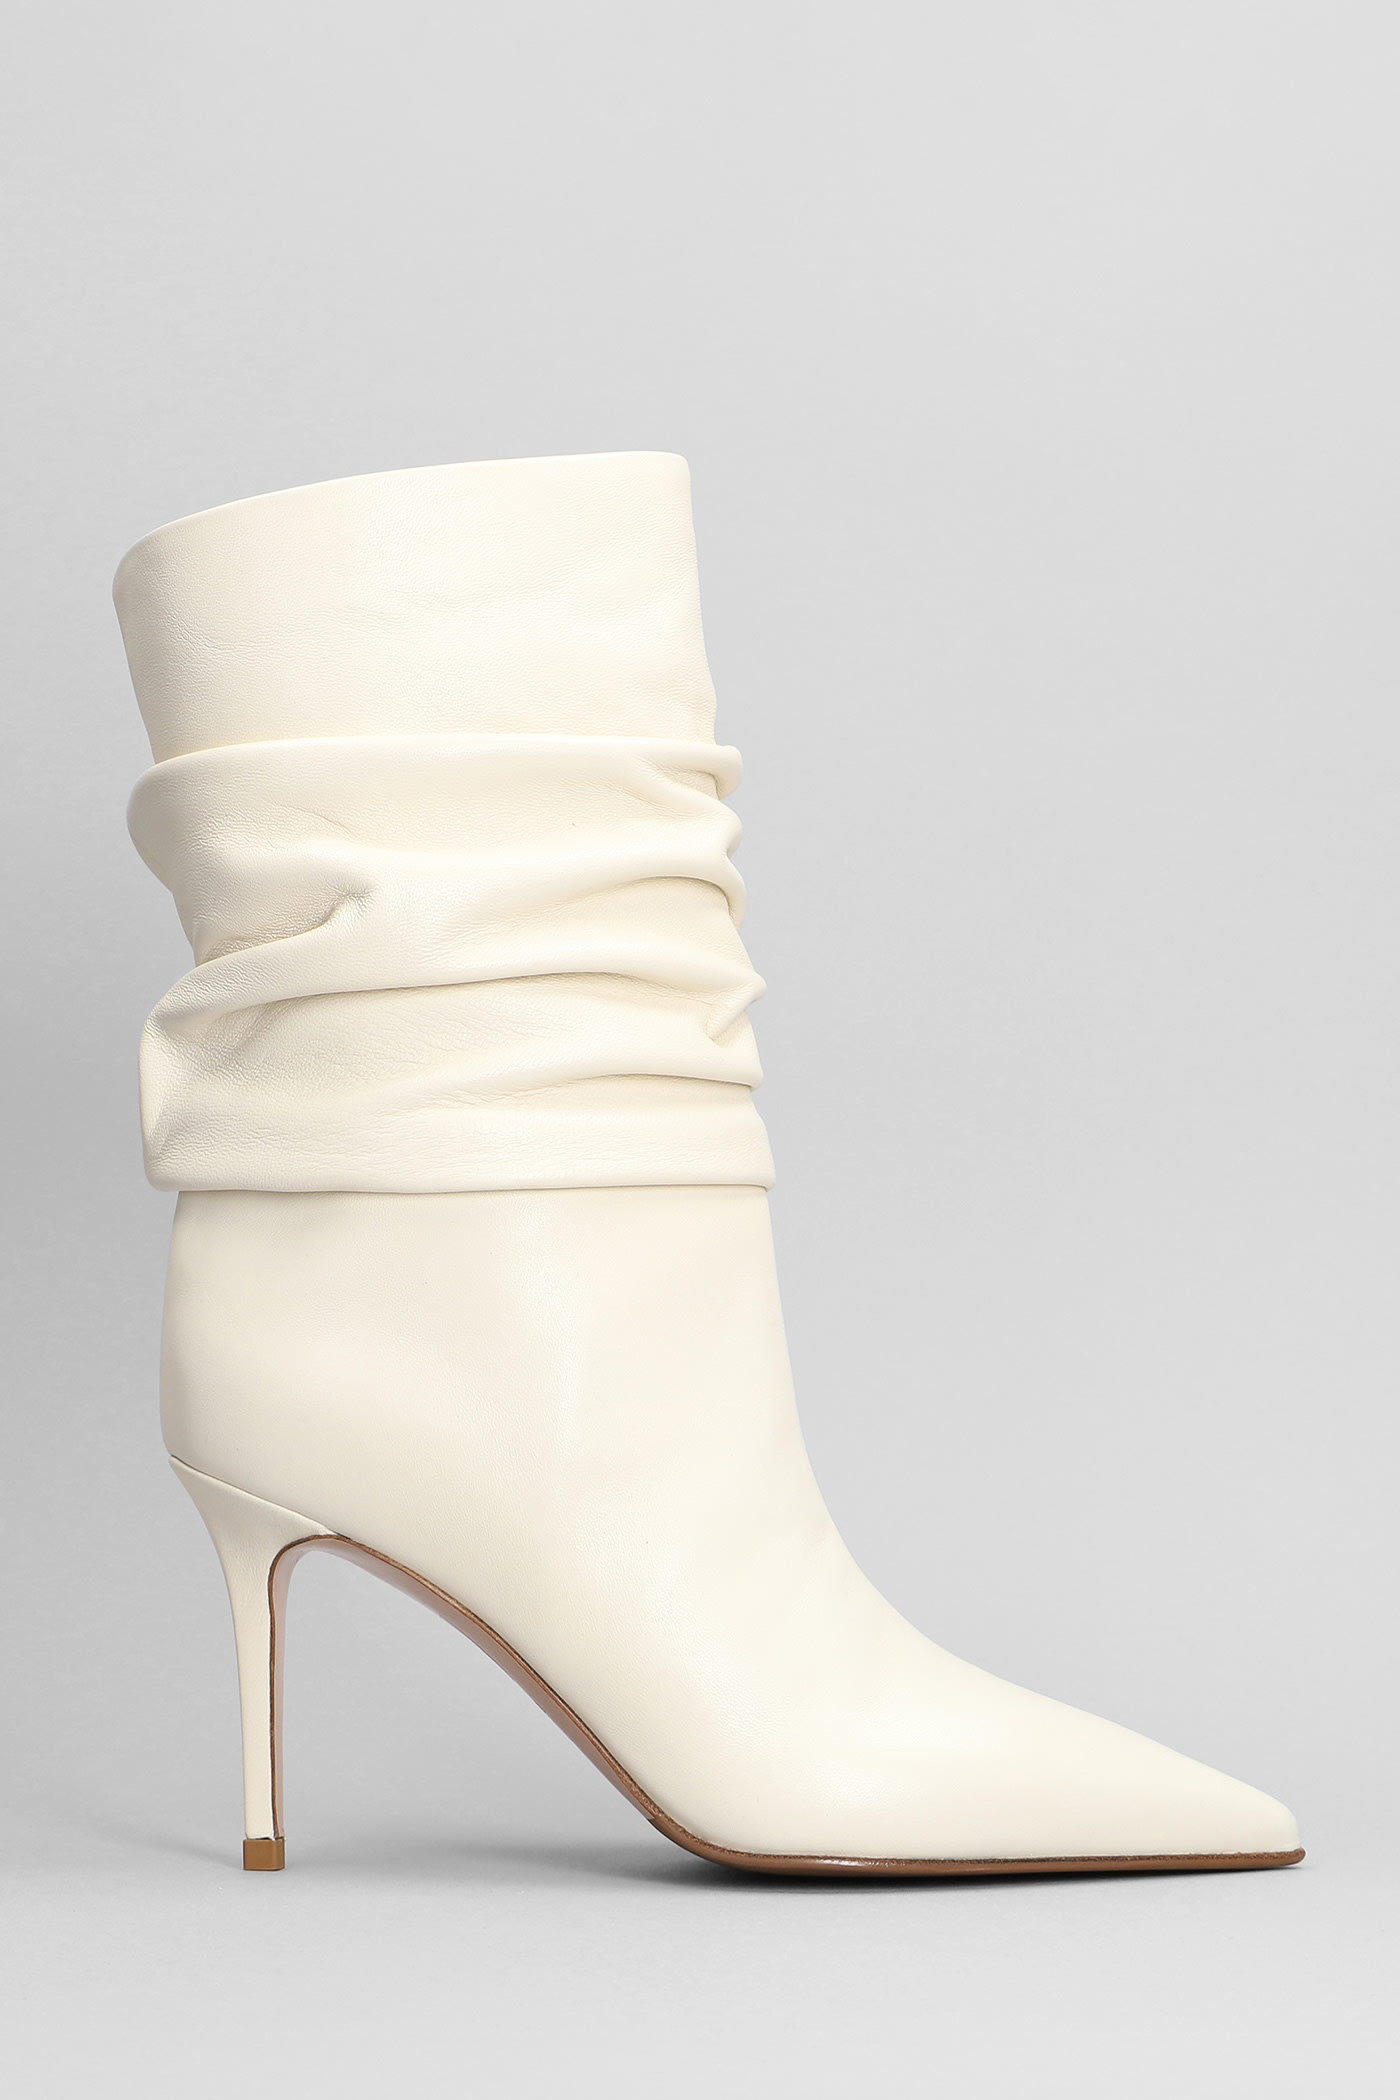 Eva 90 High Heels Ankle Boots In Beige Leather